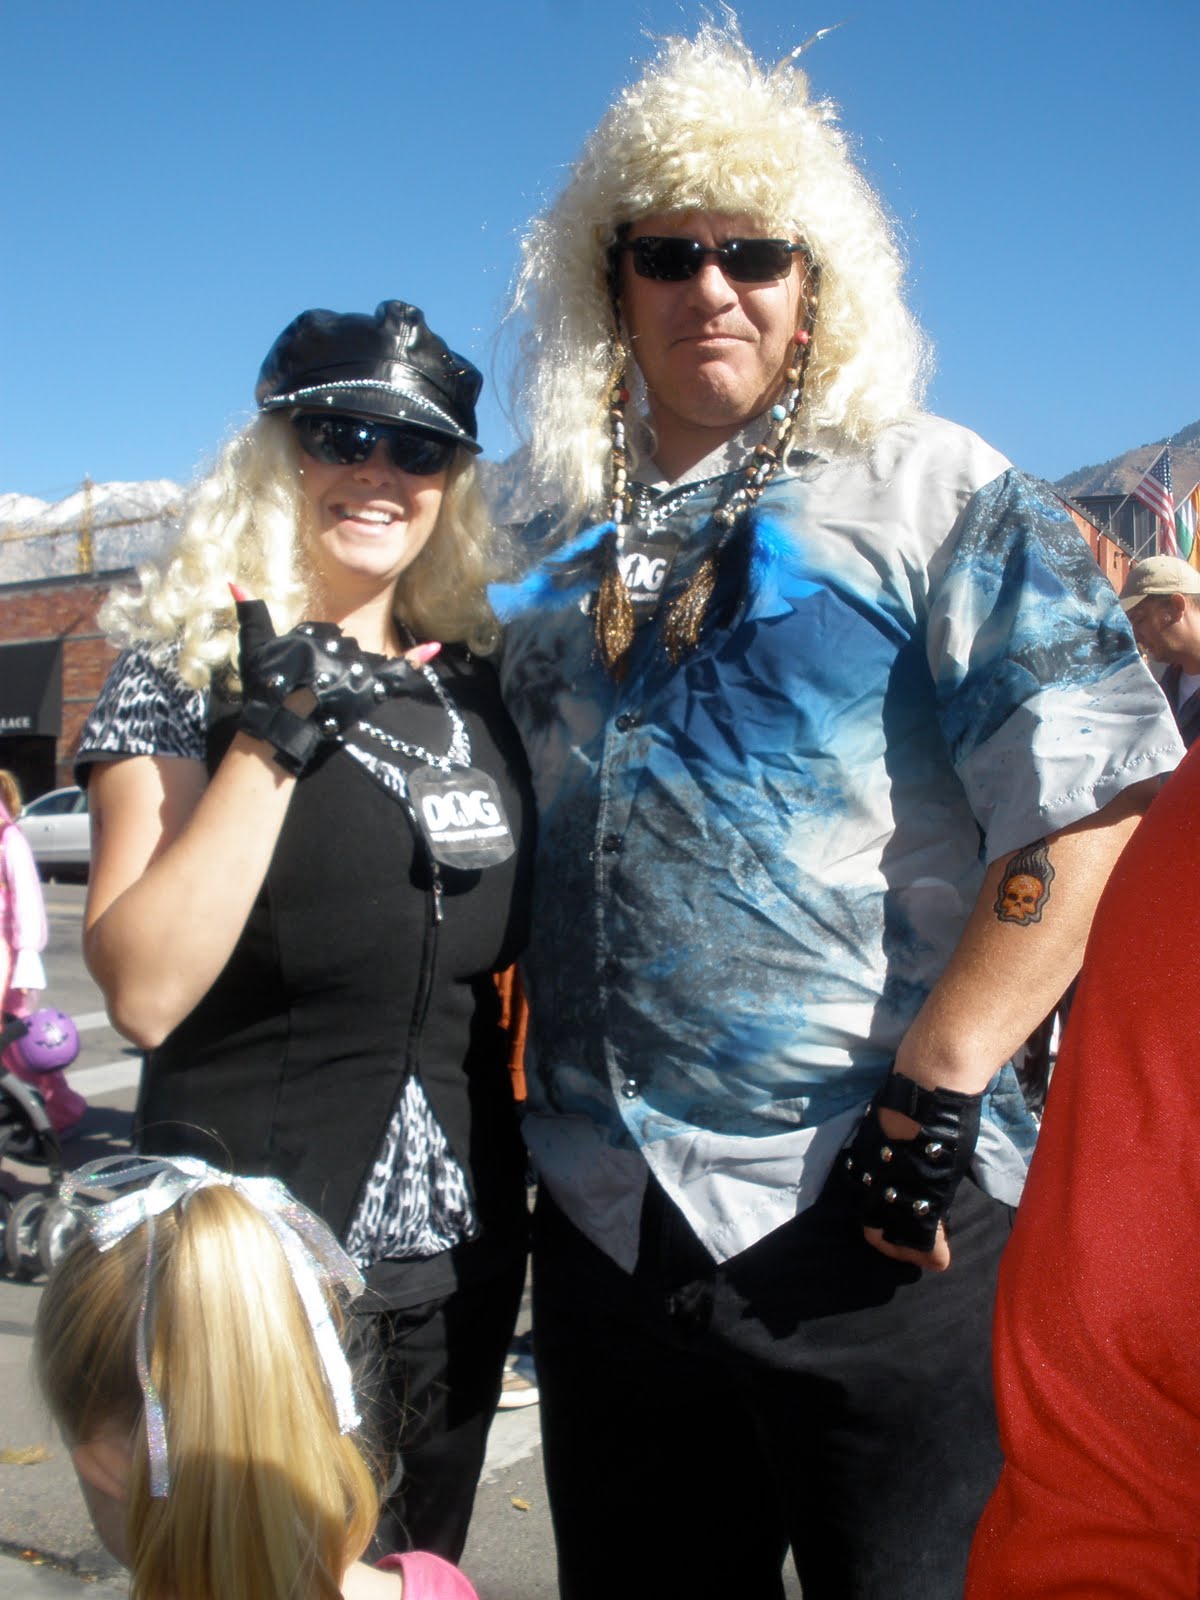 dog the bounty hunter full episodes Hd Wallpapers 1200x1600